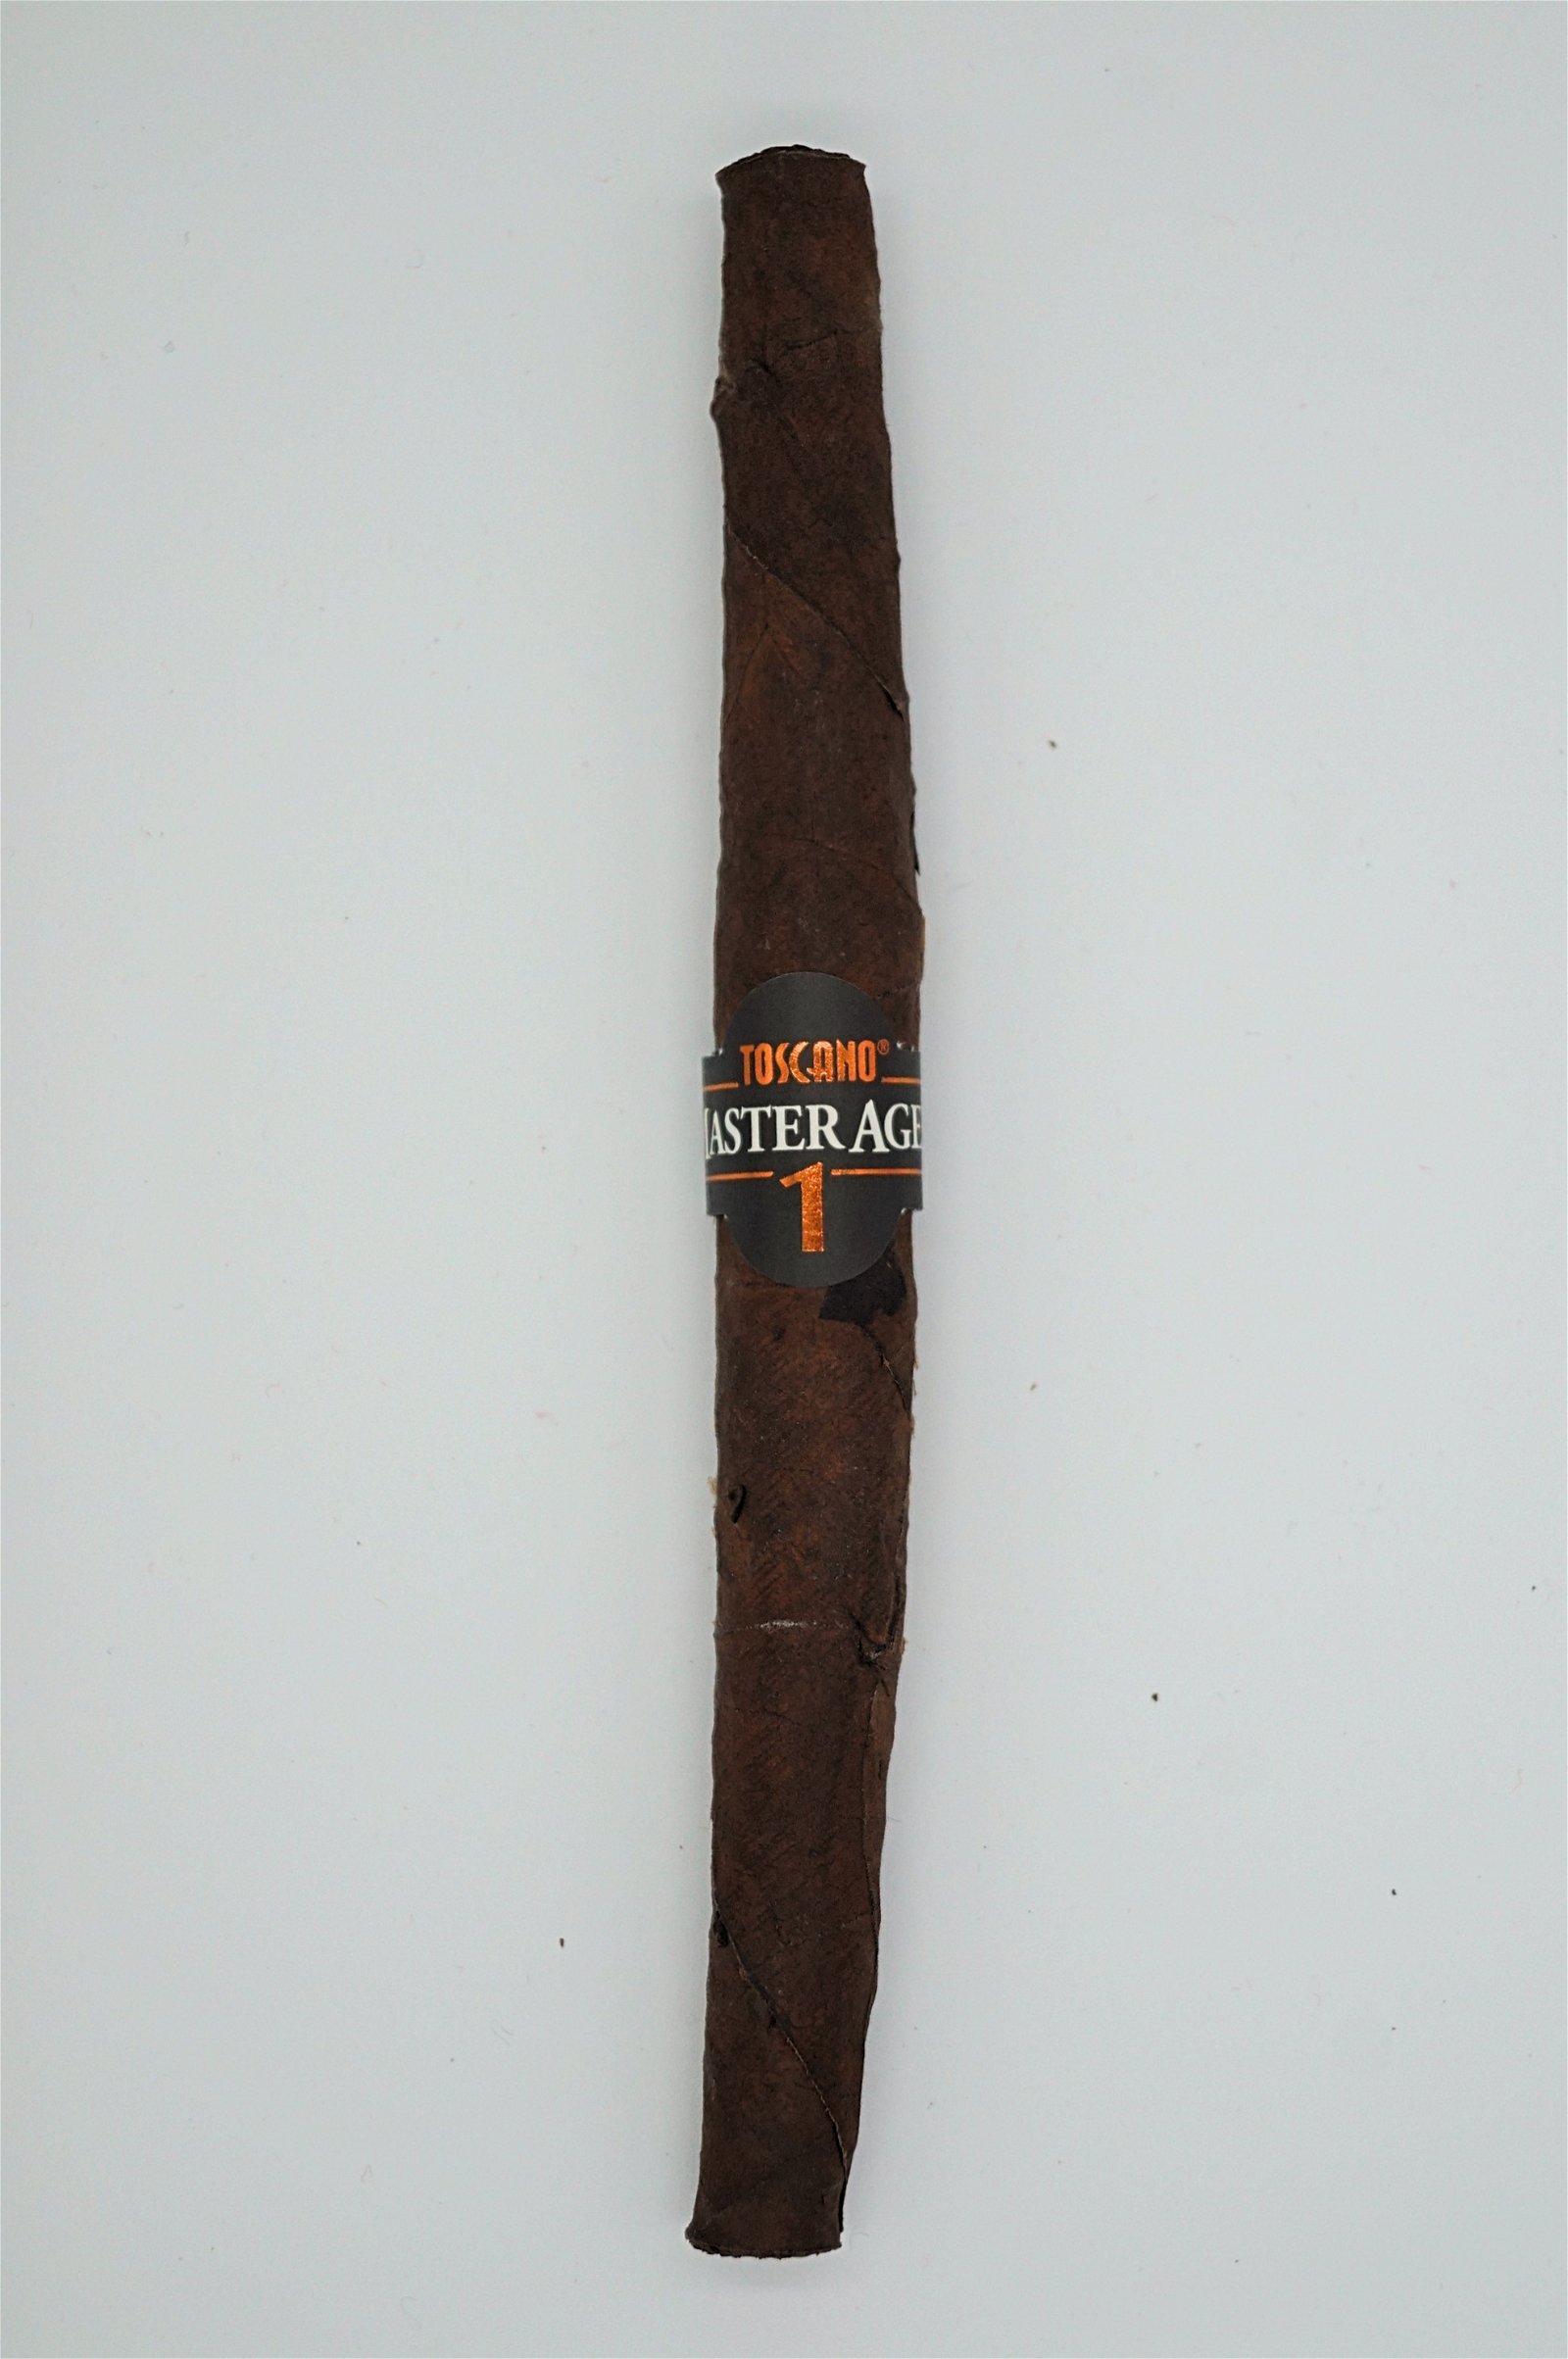 Toscano Master Aged Serie 1